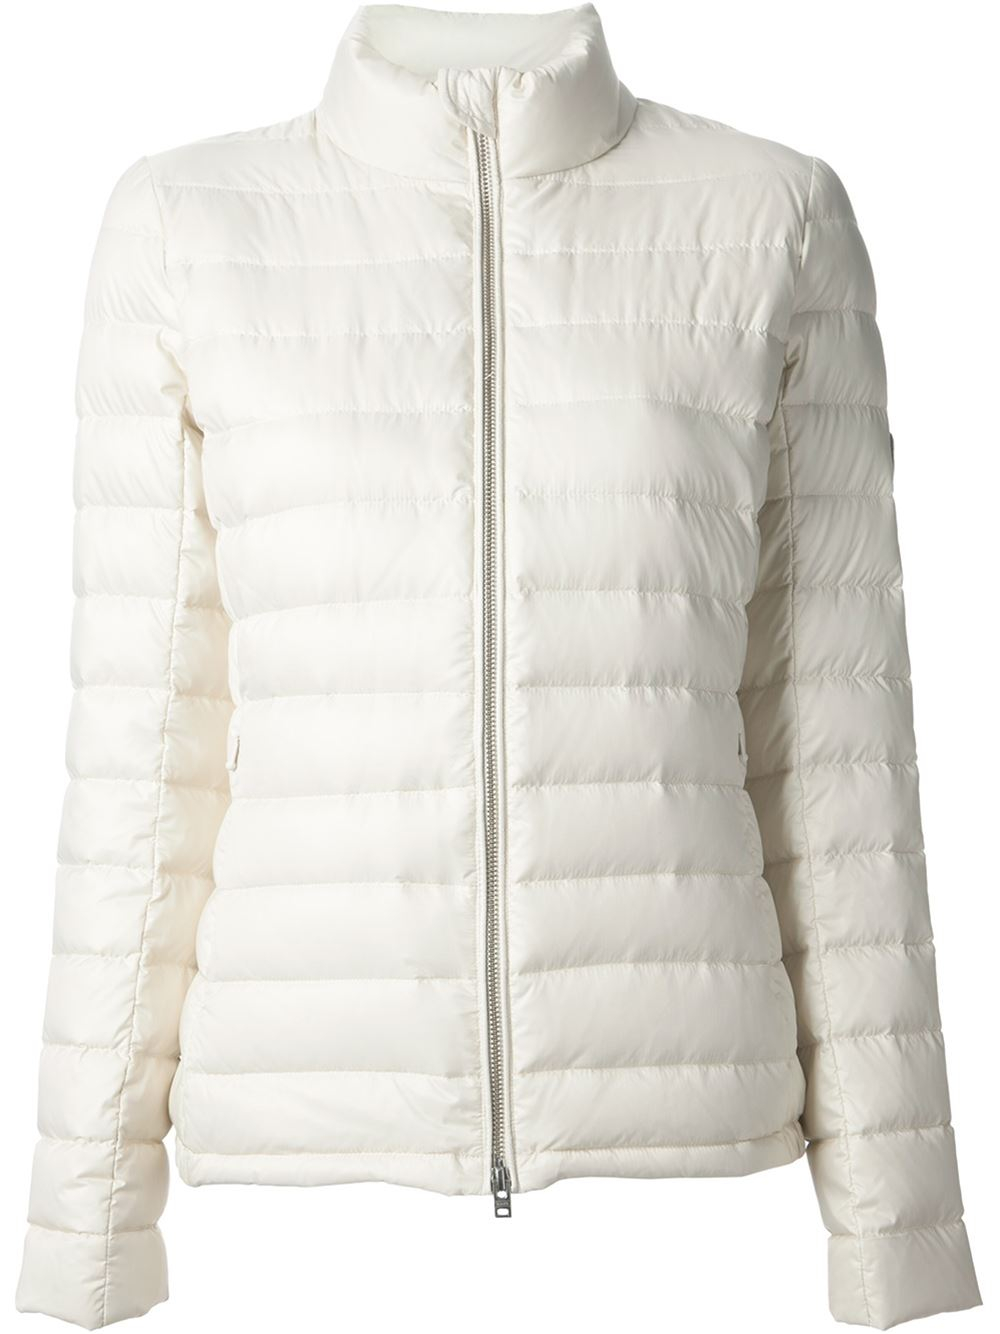 Lyst - Closed Padded Jacket in White